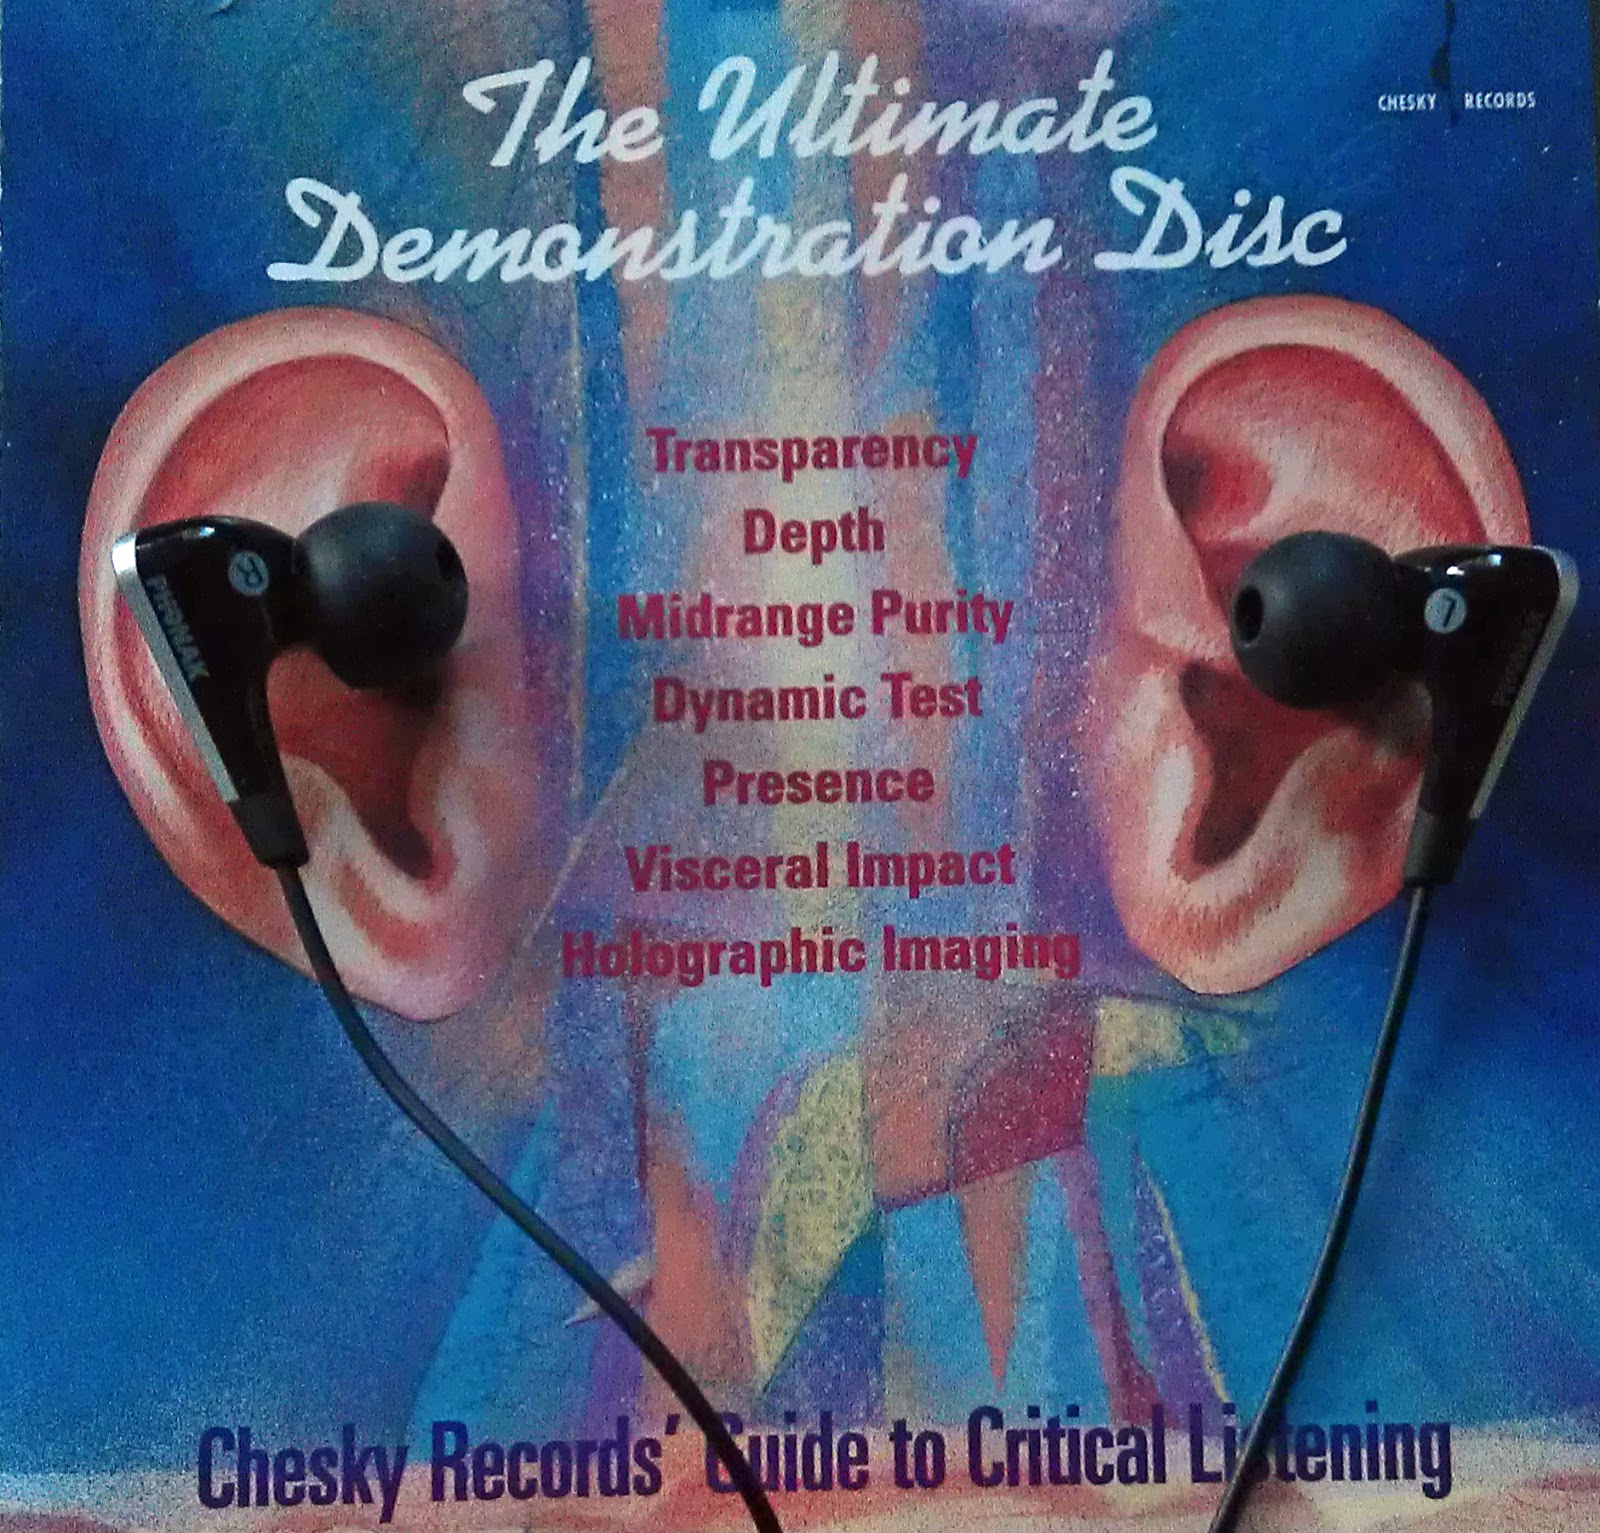 The Ultimate Demonstration Disc